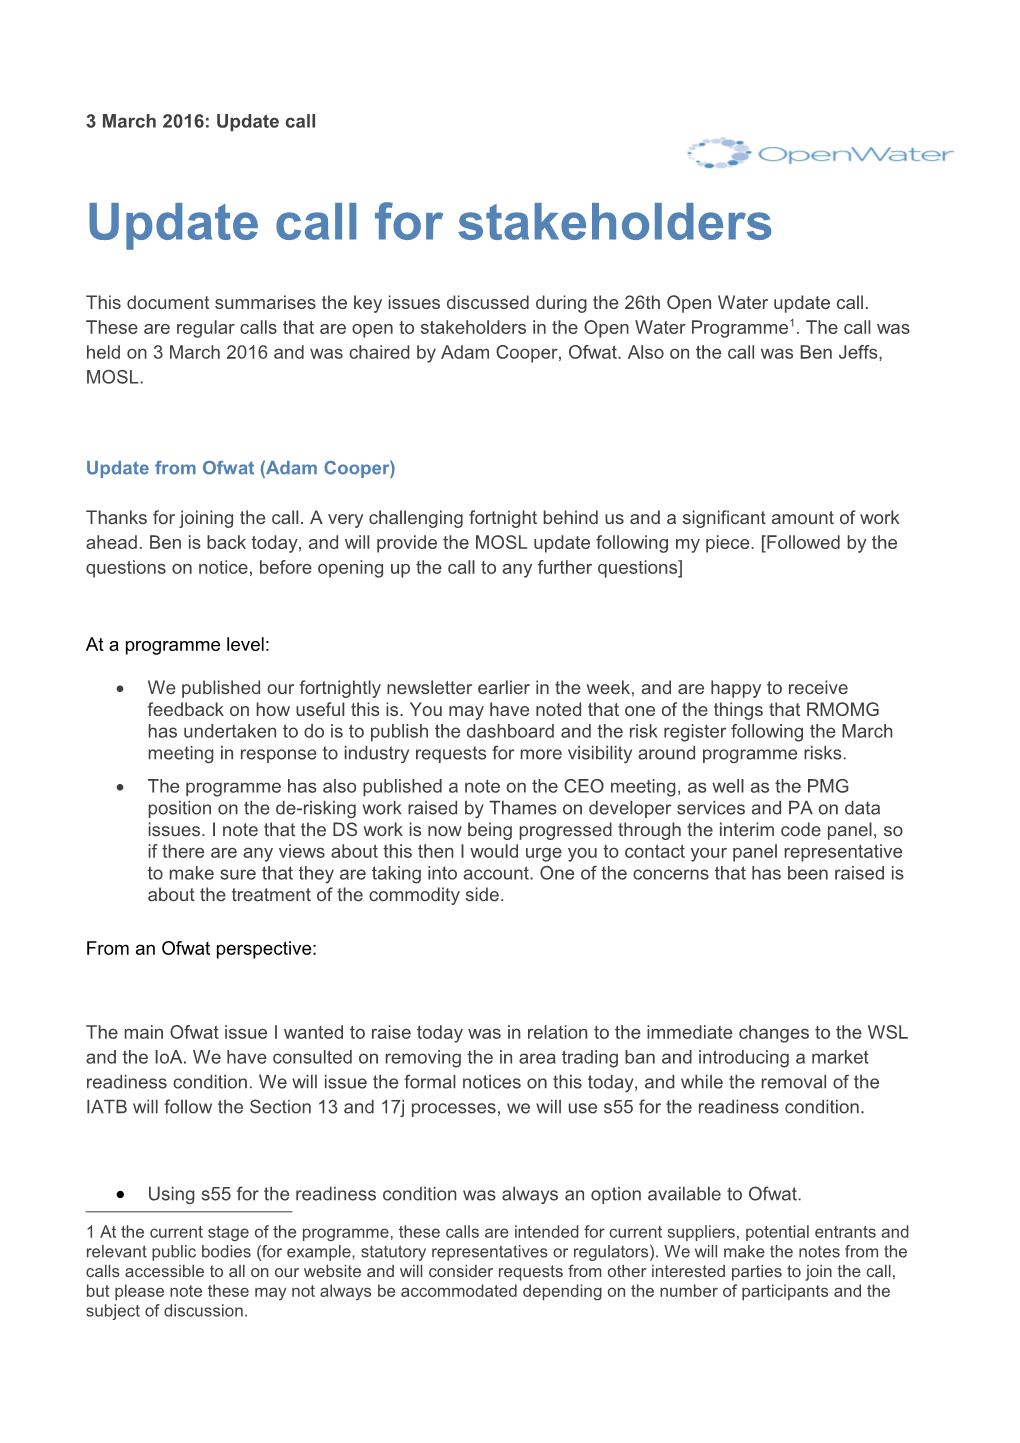 Update Call for Stakeholders